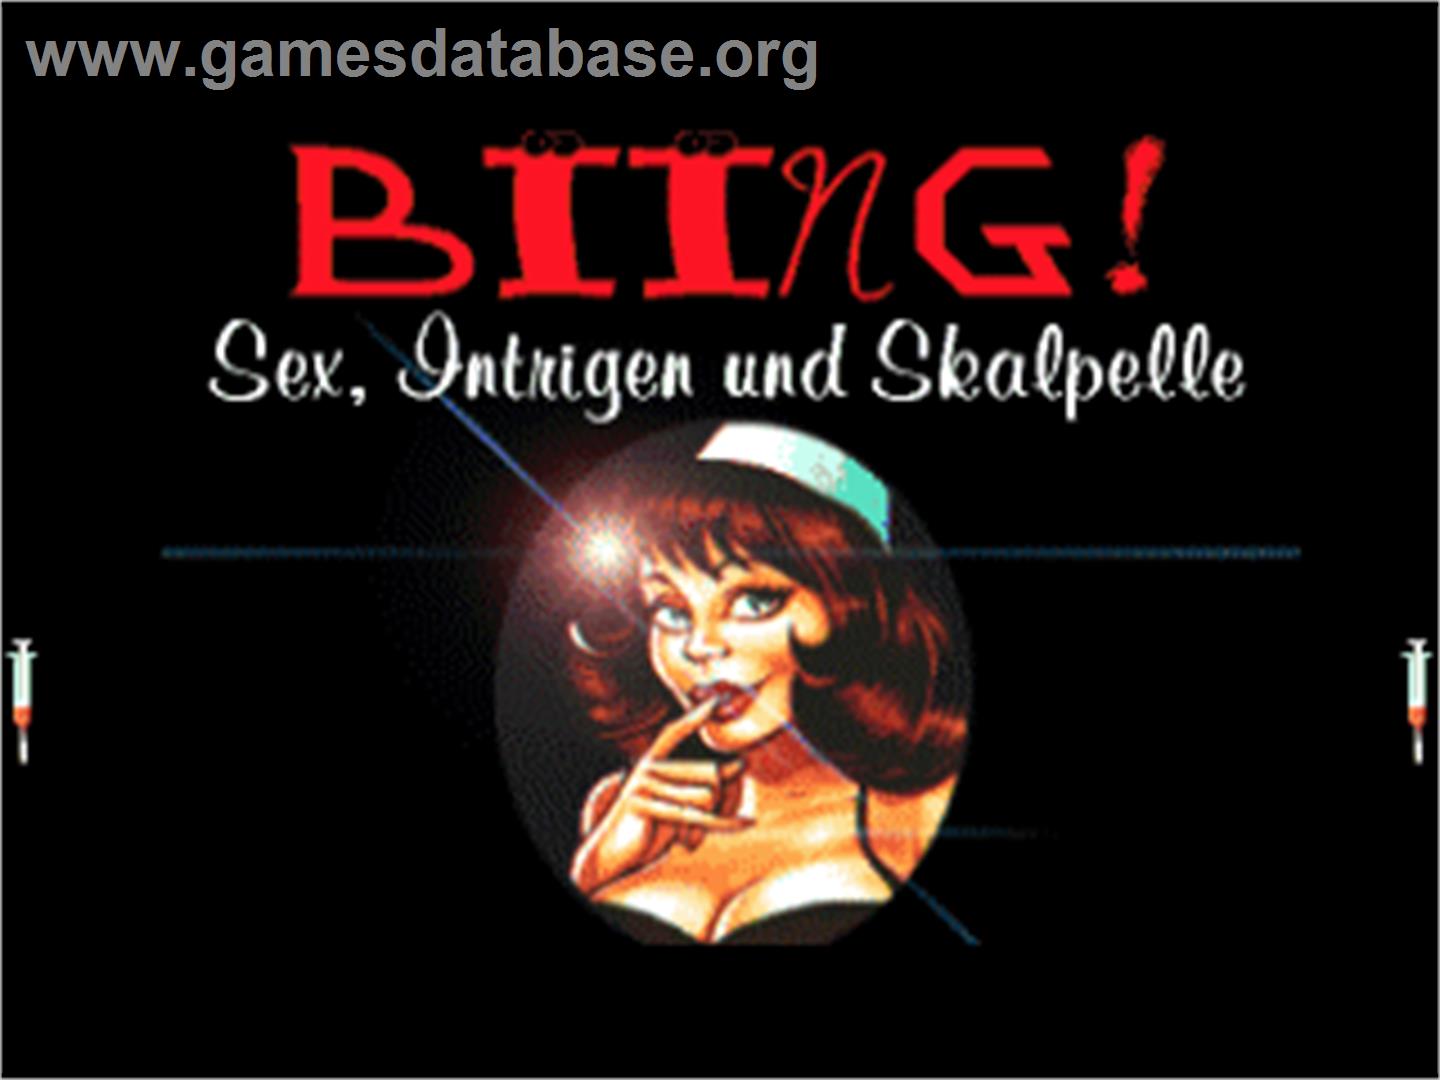 Biing!: Sex, Intrigue and Scalpels - Commodore Amiga - Artwork - Title Screen